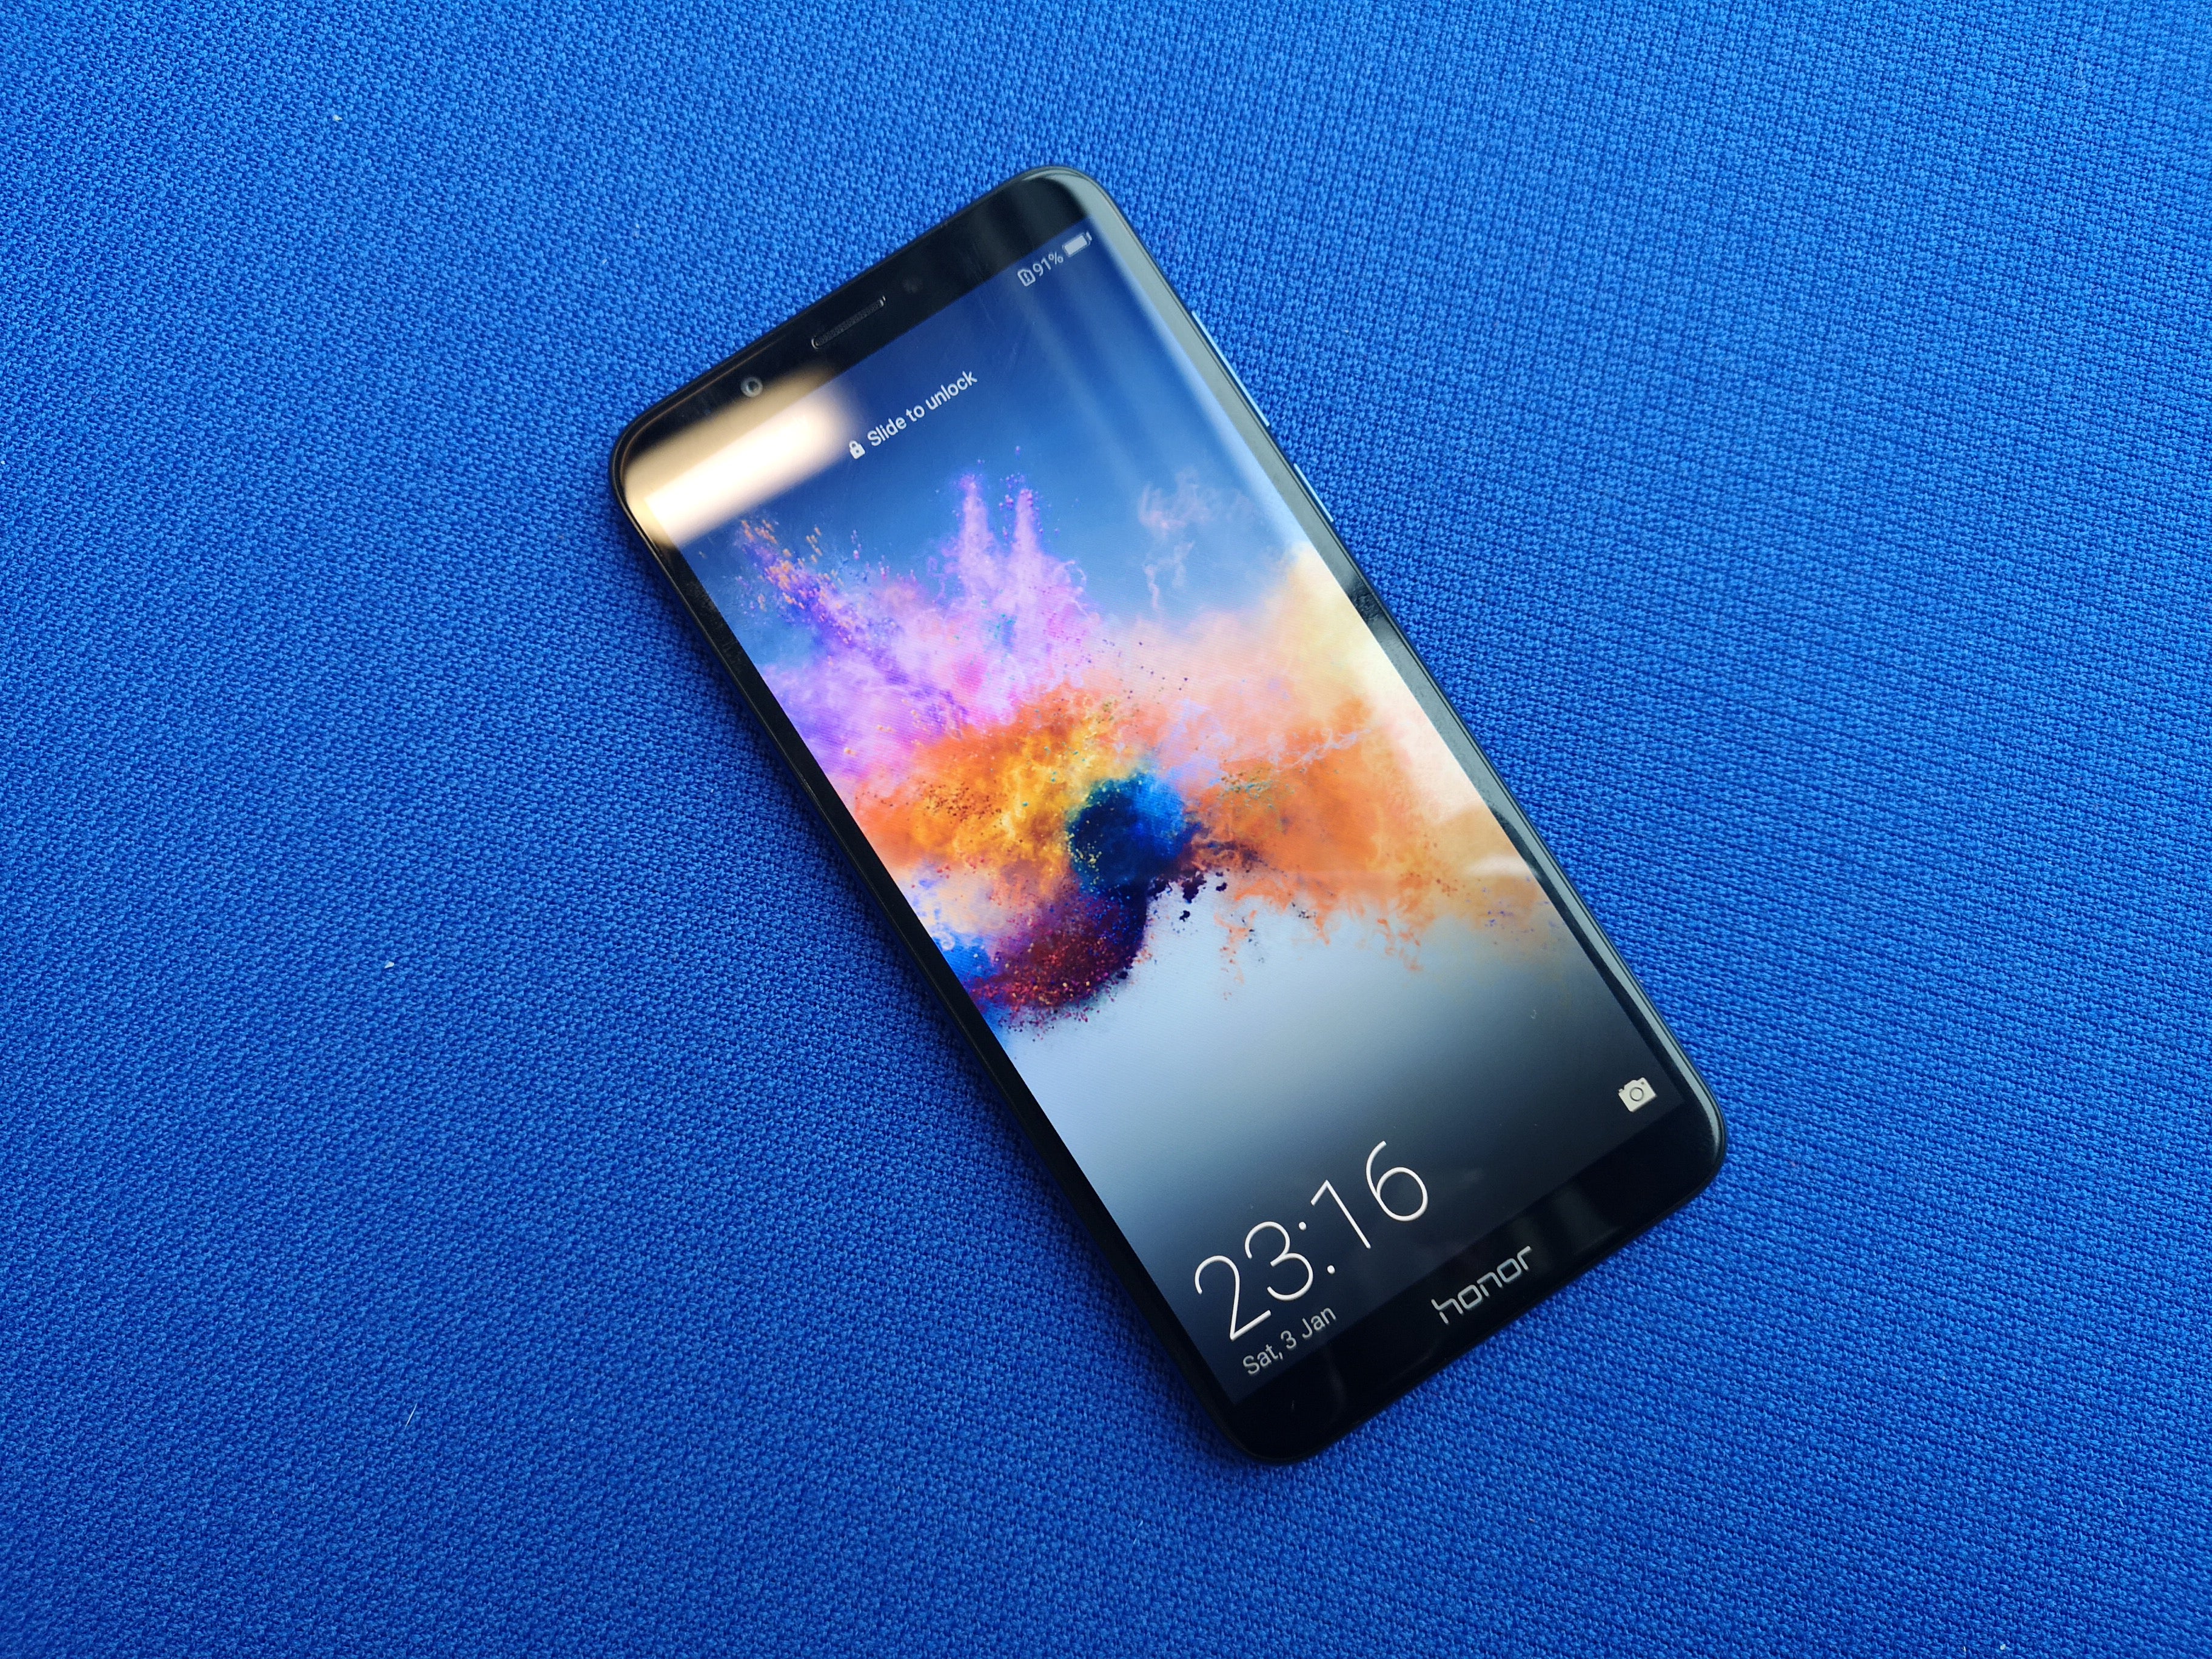 Honor 7C smartphone displaying time and colorful wallpaper.Hand holding Honor 7C smartphone with colorful wallpaper displayed.